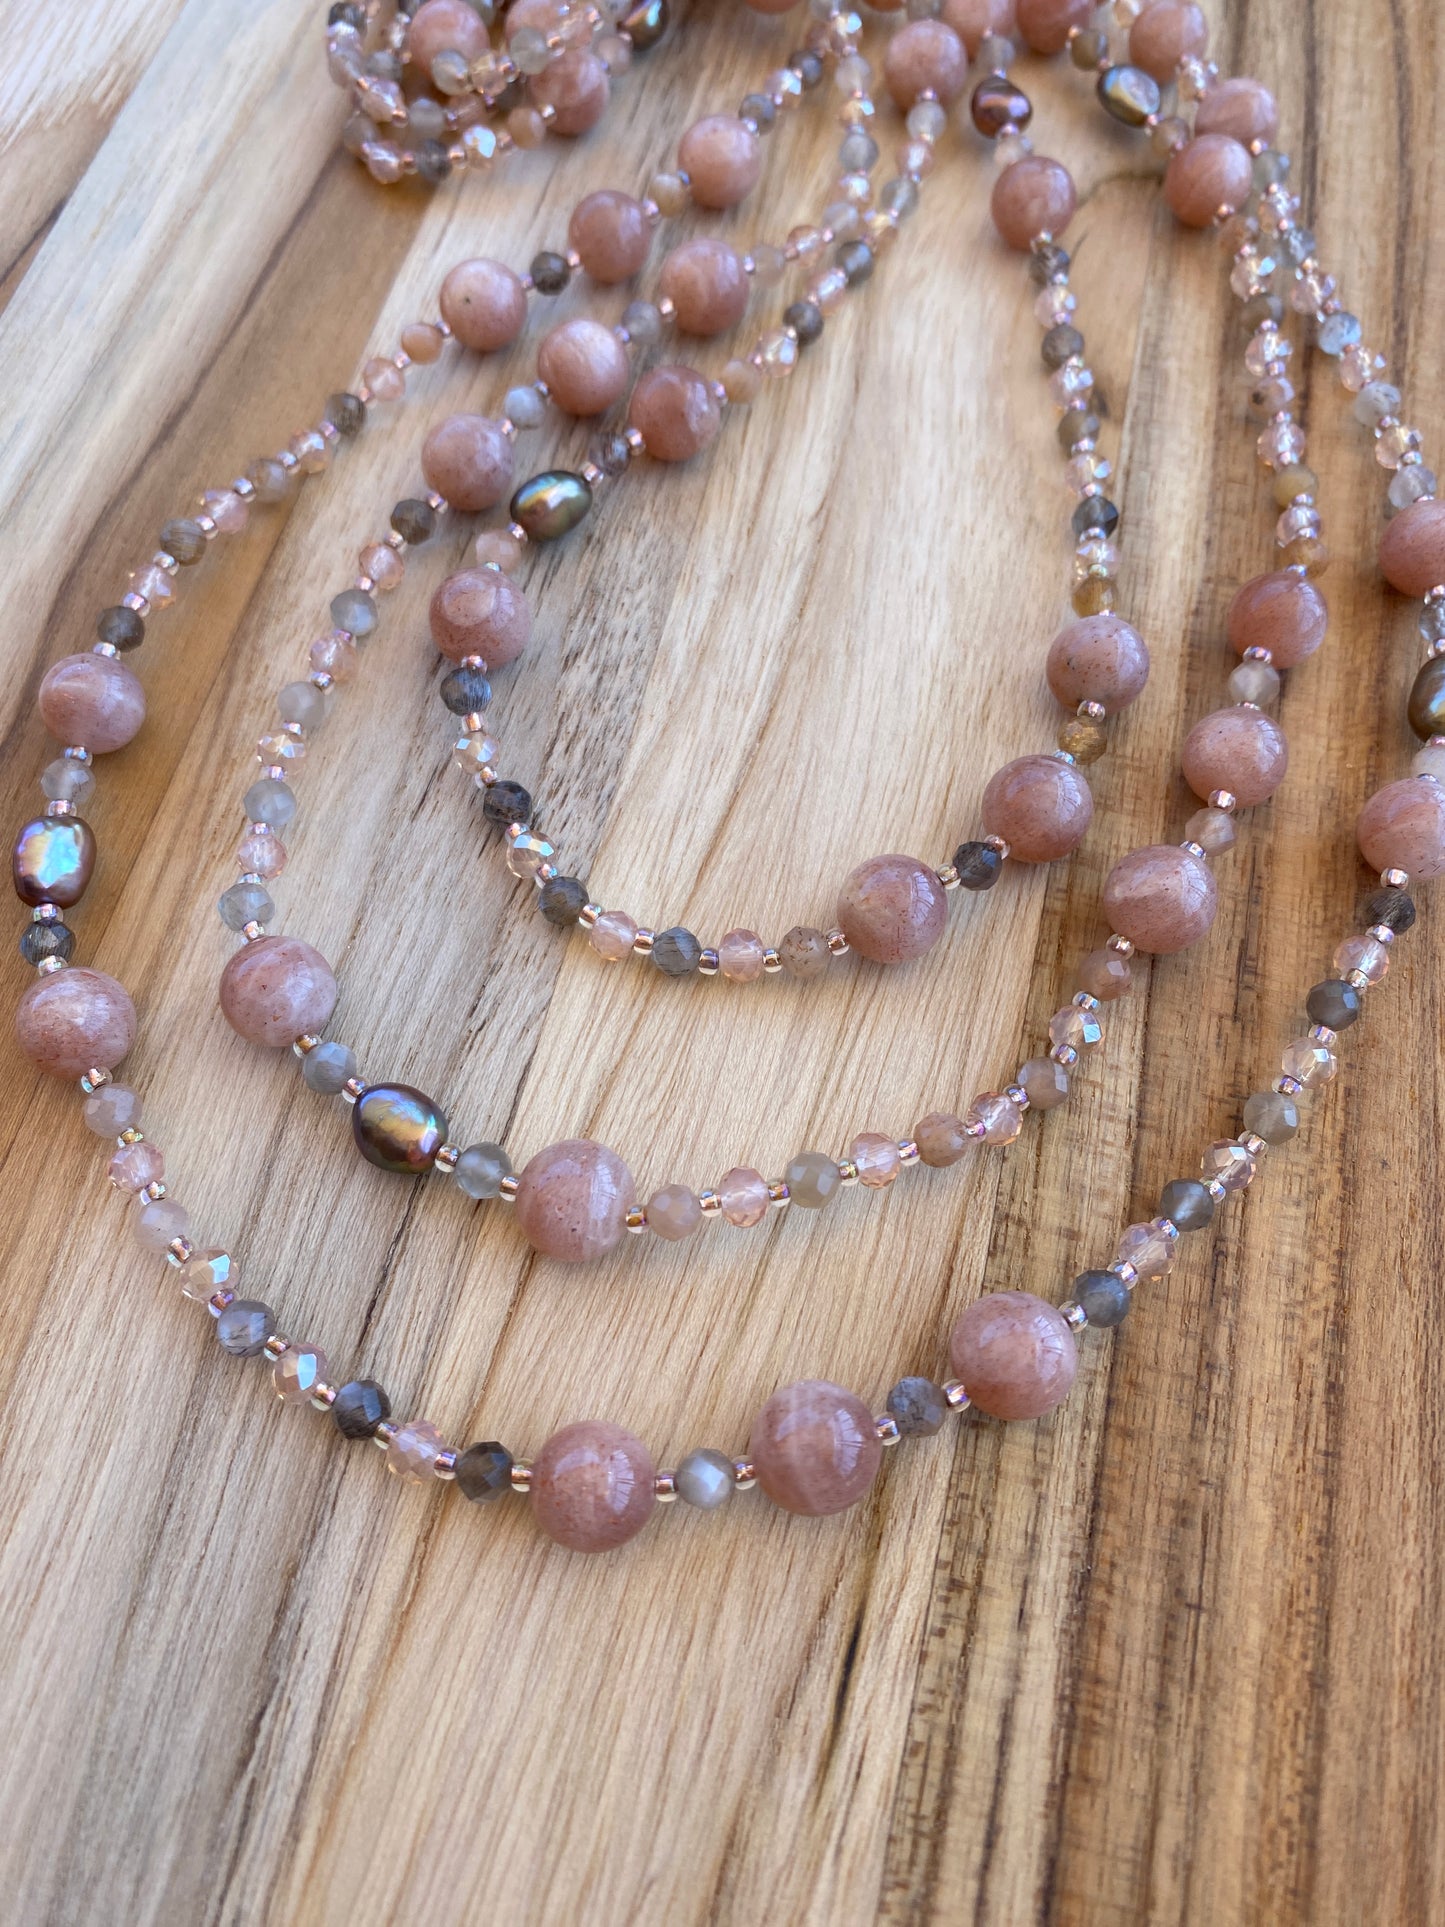 Extra Long Beaded Sunstone and Multi Colored Moonstone Necklace with Crystal Beads